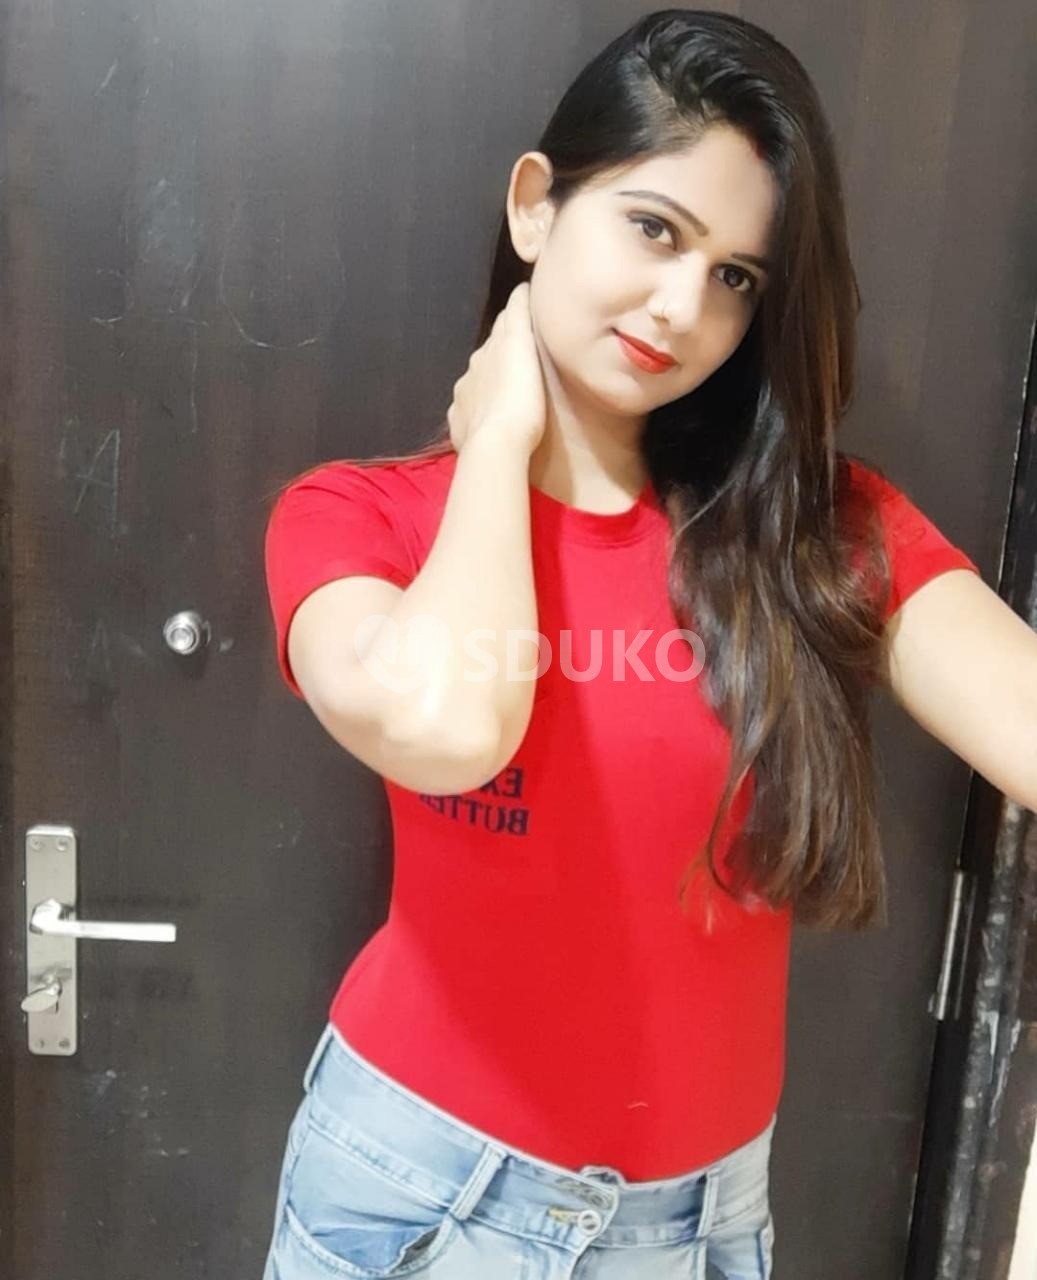 Velachery ☎️ VIP LOW RATE (Kavya) ESCORT FULL HARD FUCK WITH NAUGHTY IF YOU WANT TO FUCK MY PUSSY WITH BIG BOOBS GIR